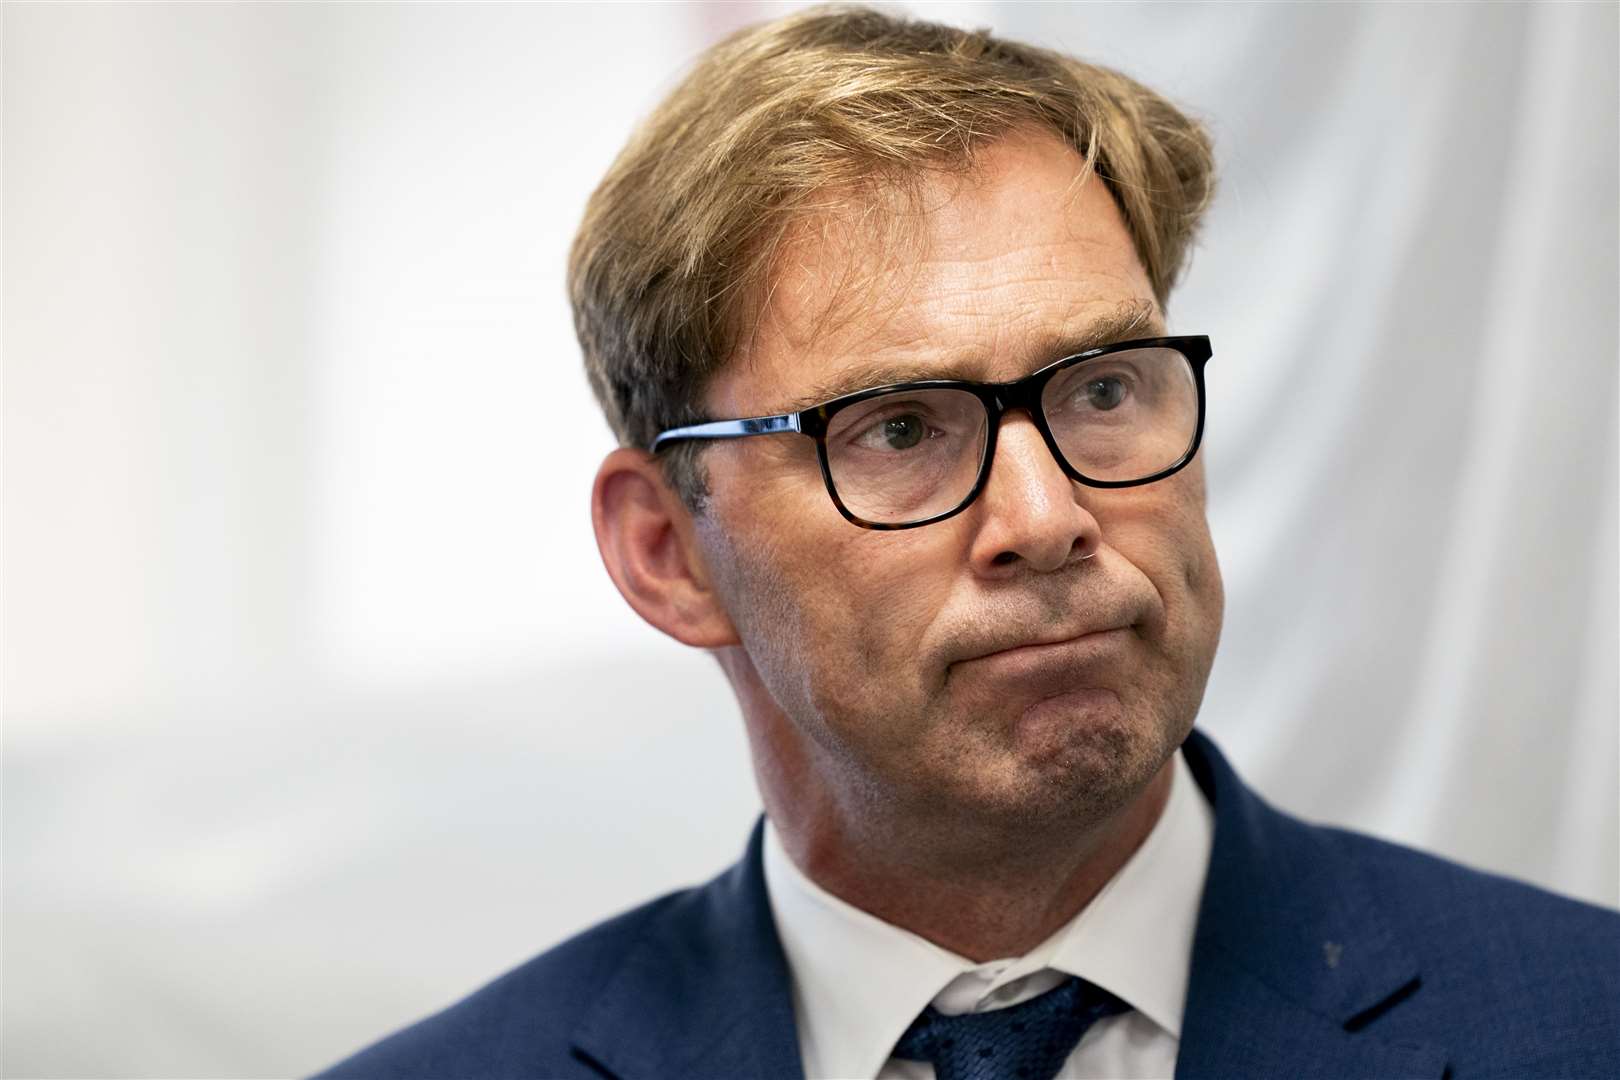 Tobias Ellwood has described the disappearance of the signs as an ‘act of antisemitic vandalism’ (Jordan Pettitt/PA)